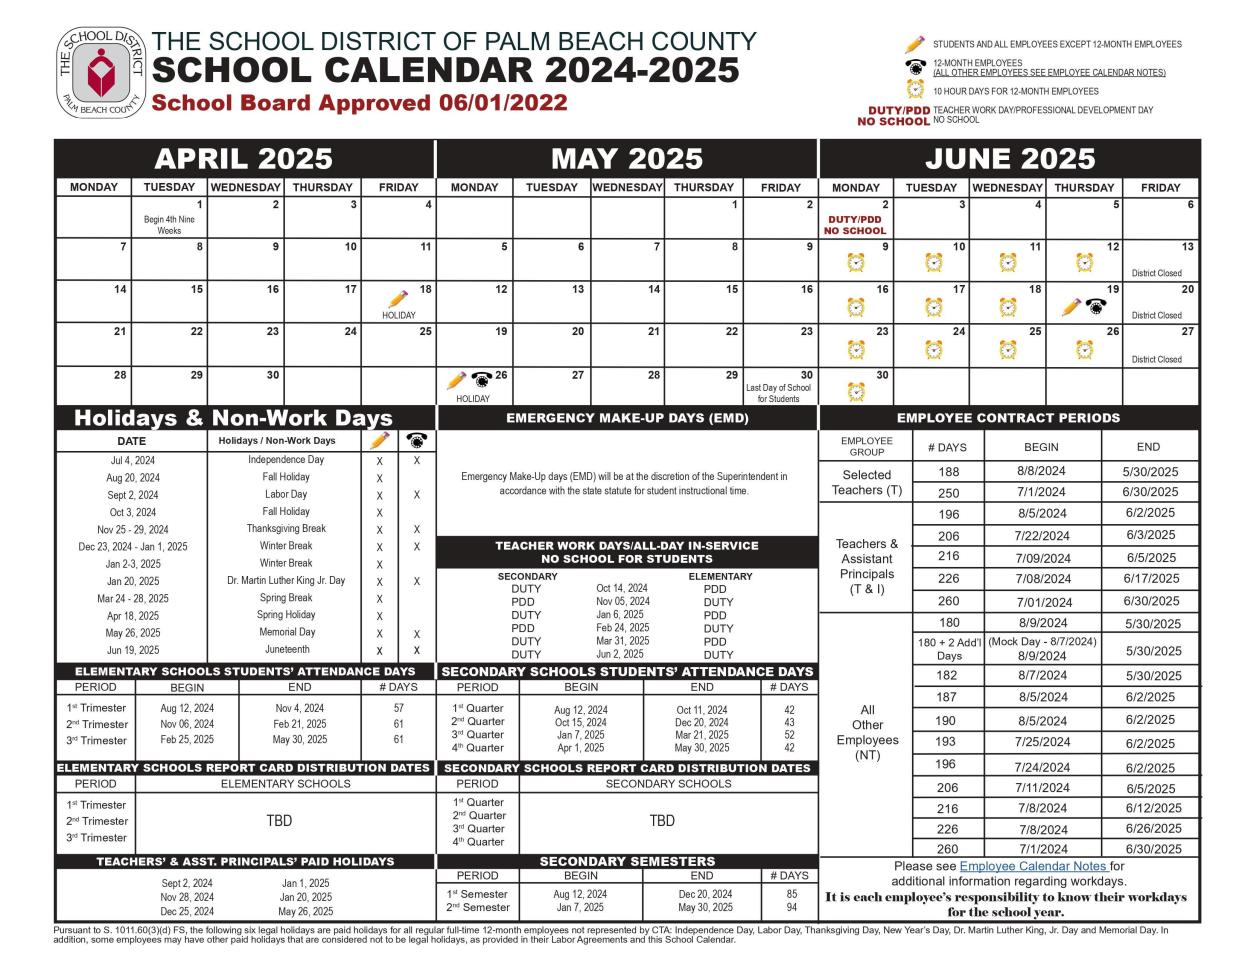 The calendar for Palm Beach County schools for the 2024-25 school year.